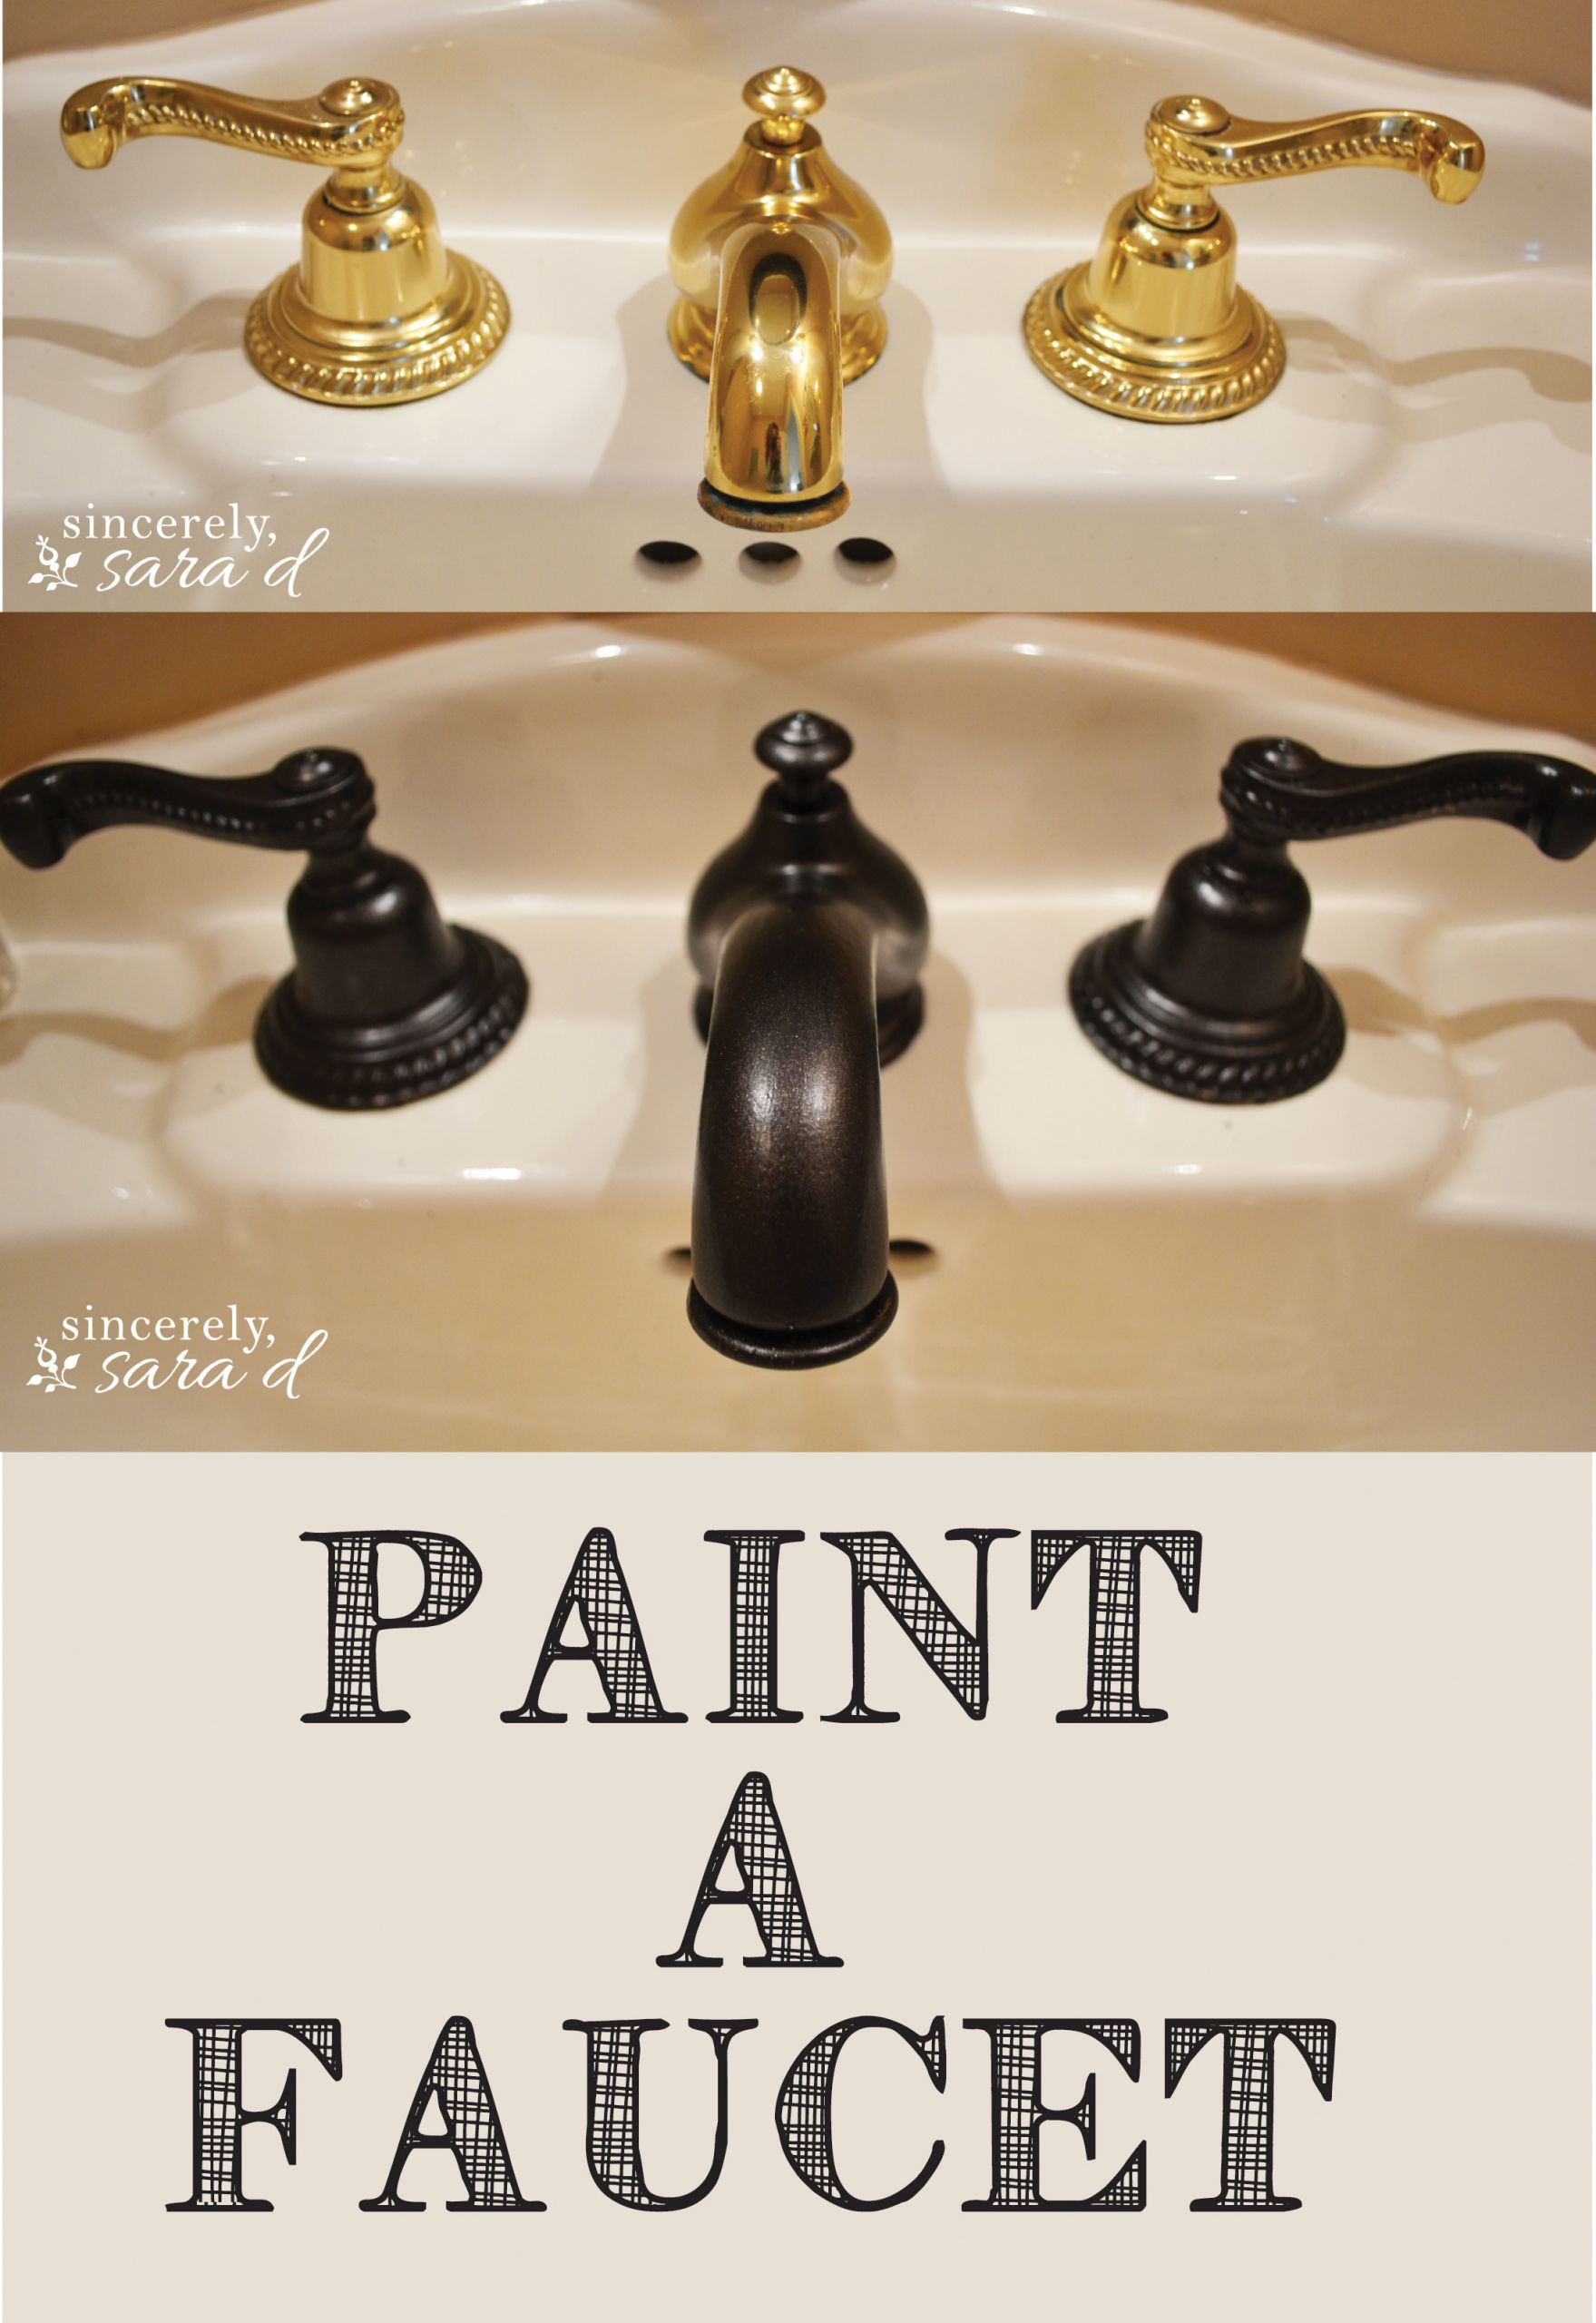 Painting Bathroom Fixtures
 How to Paint a Faucet